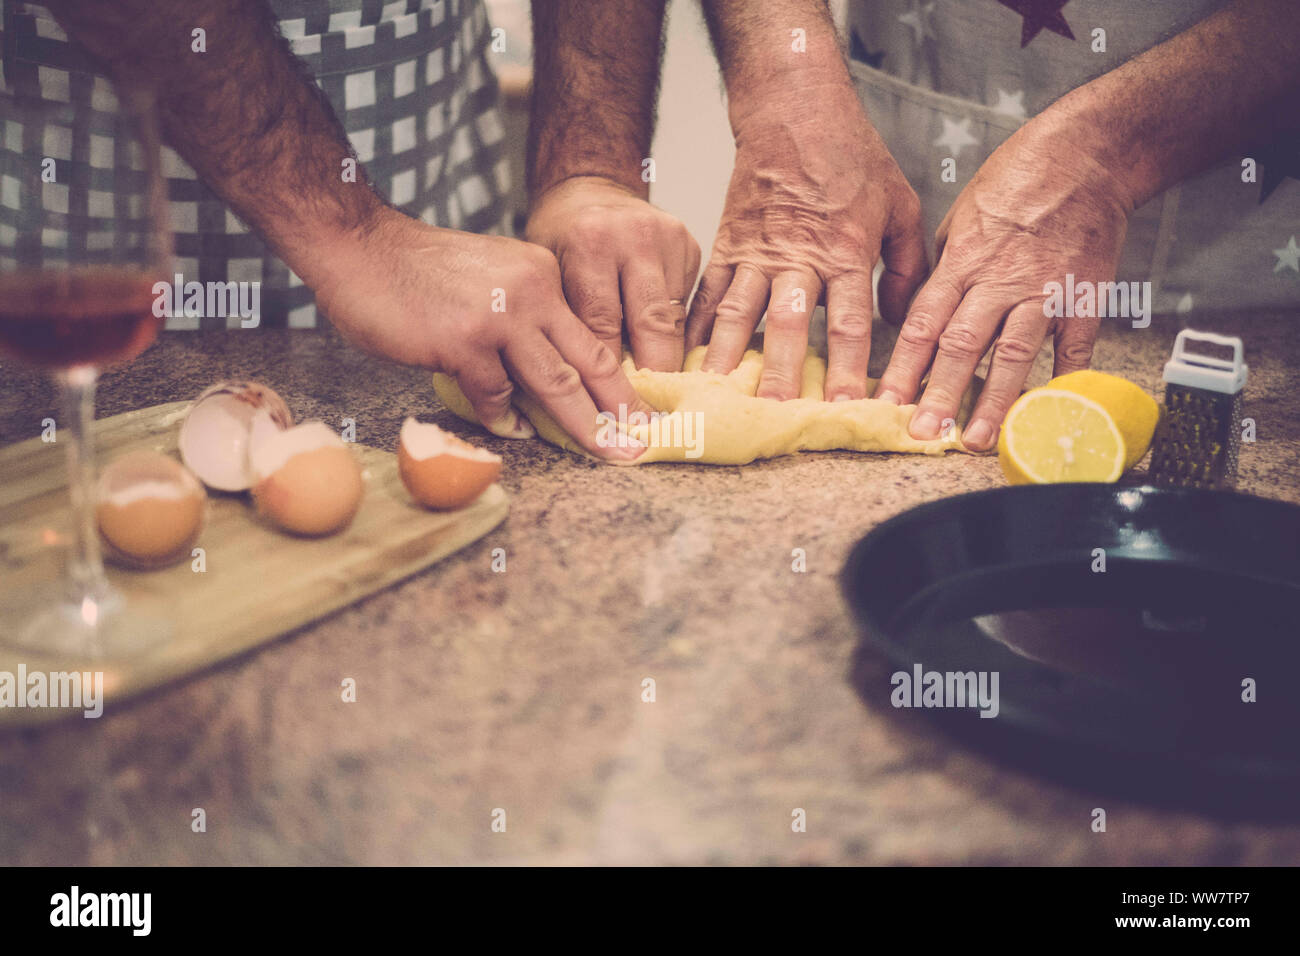 cake making of at home with two pair of men hands push the ingredients. eggs and lemon and wine, vintage brown warm filter and team concept Stock Photo